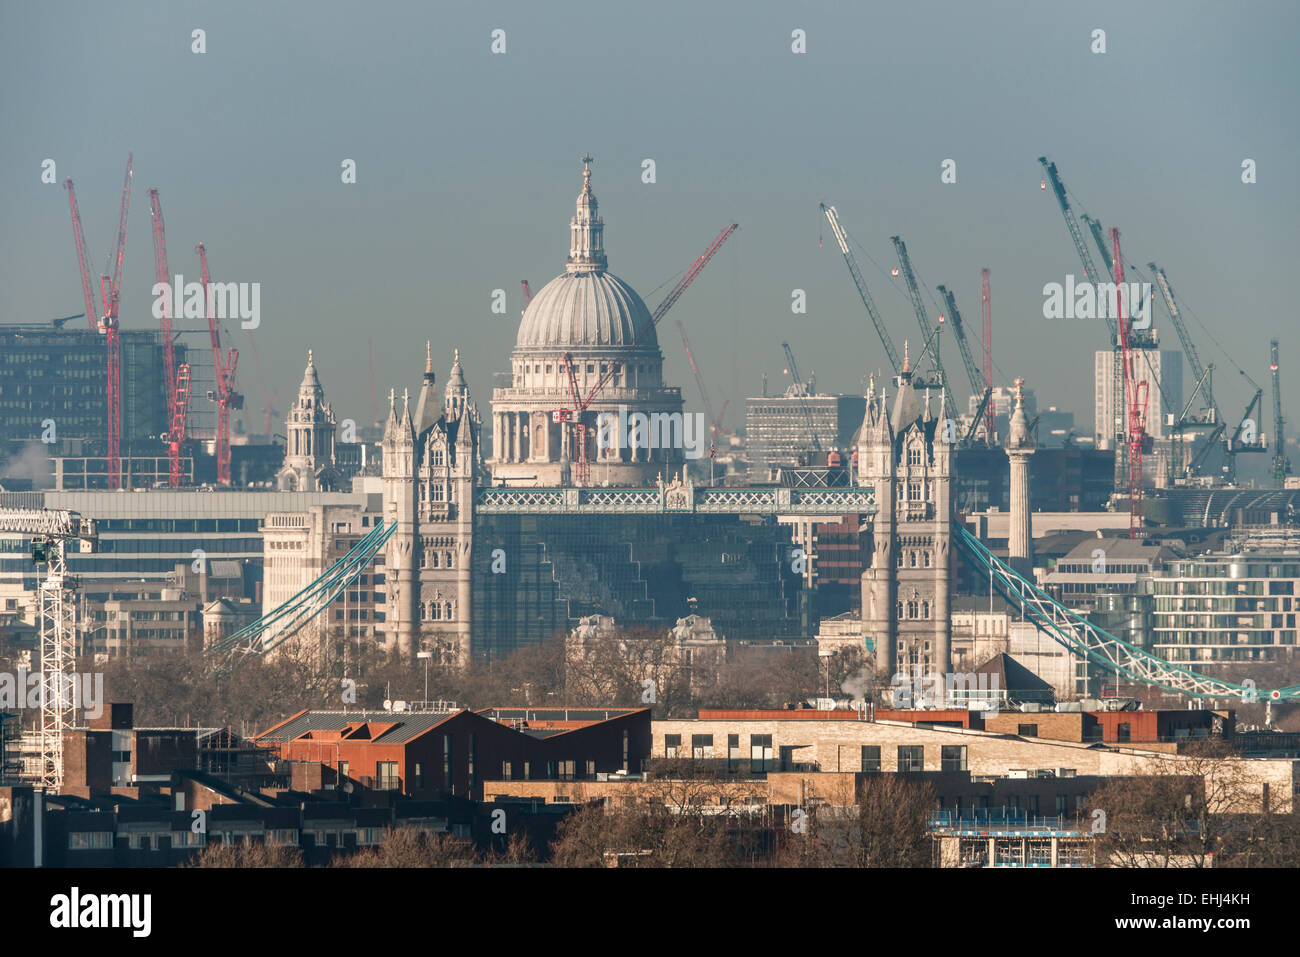 The dome of St Paul's Cathedral seen above Tower Bridge together with cranes in the sky showing construction in London Stock Photo